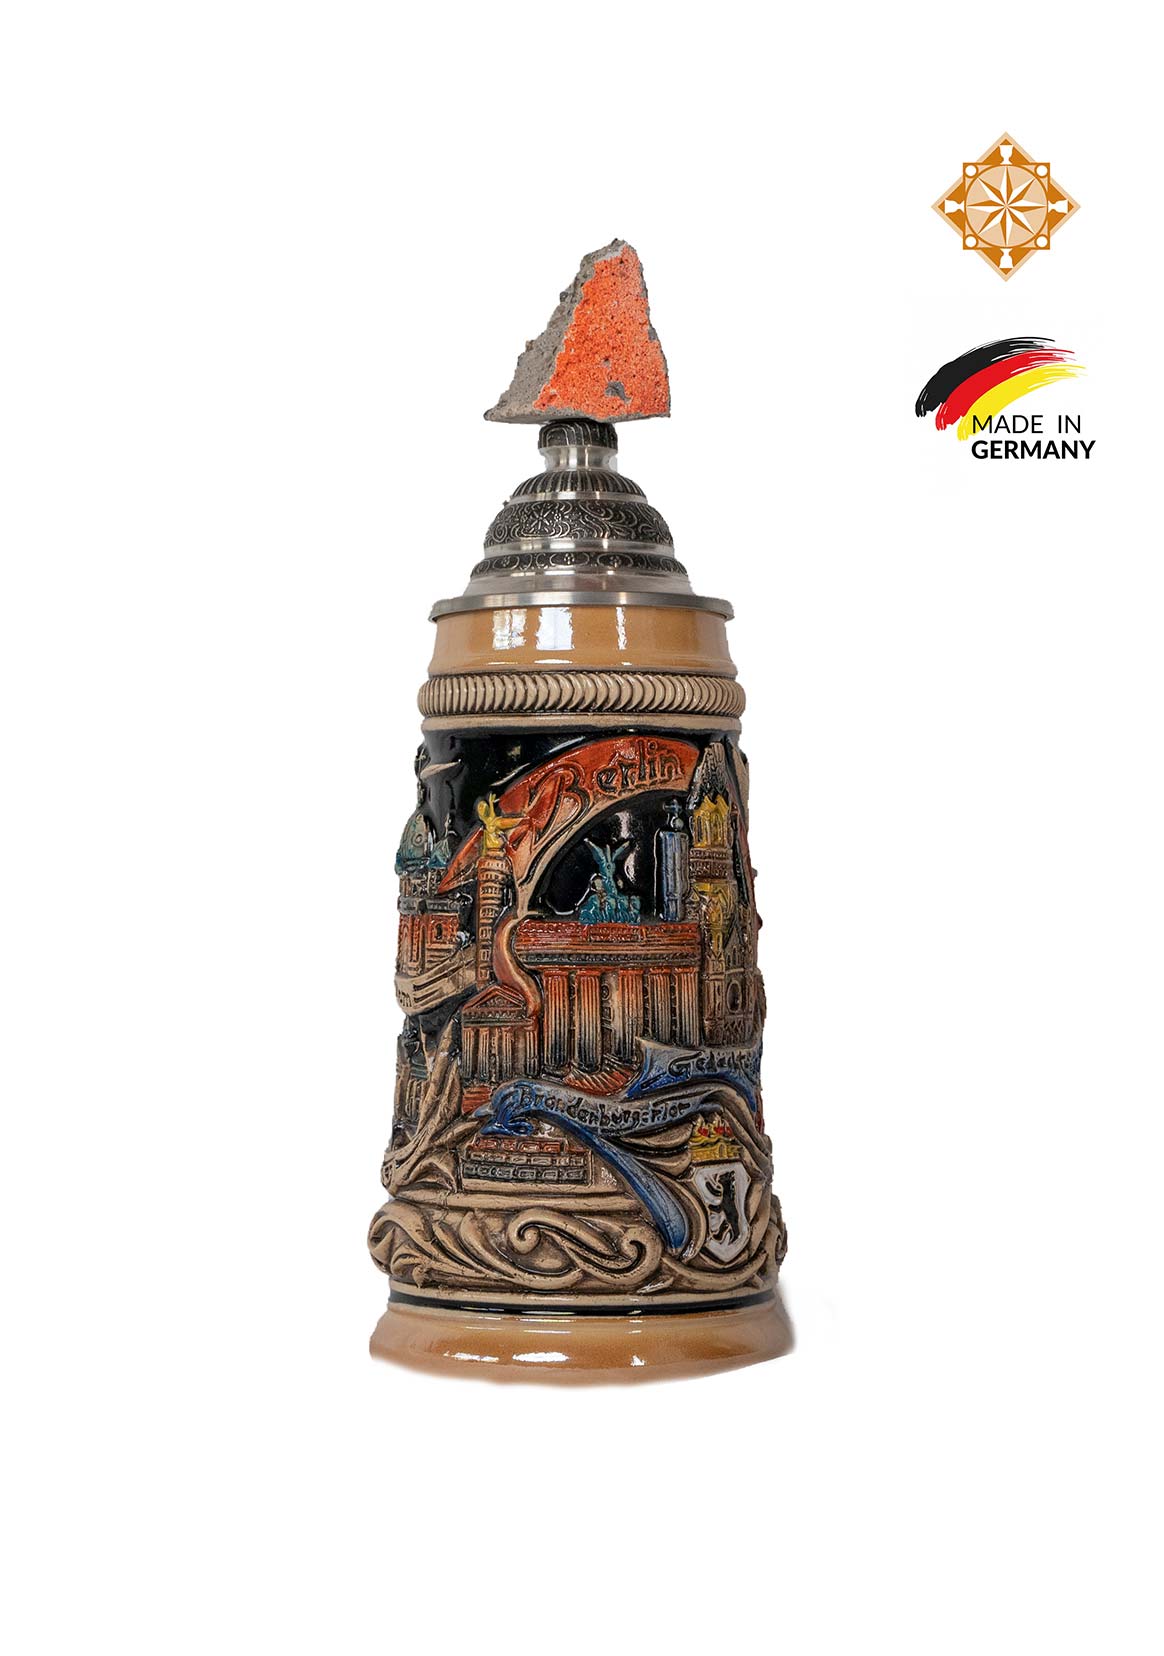 Beer Stein | Berlin Wall Piece | Limited Edition